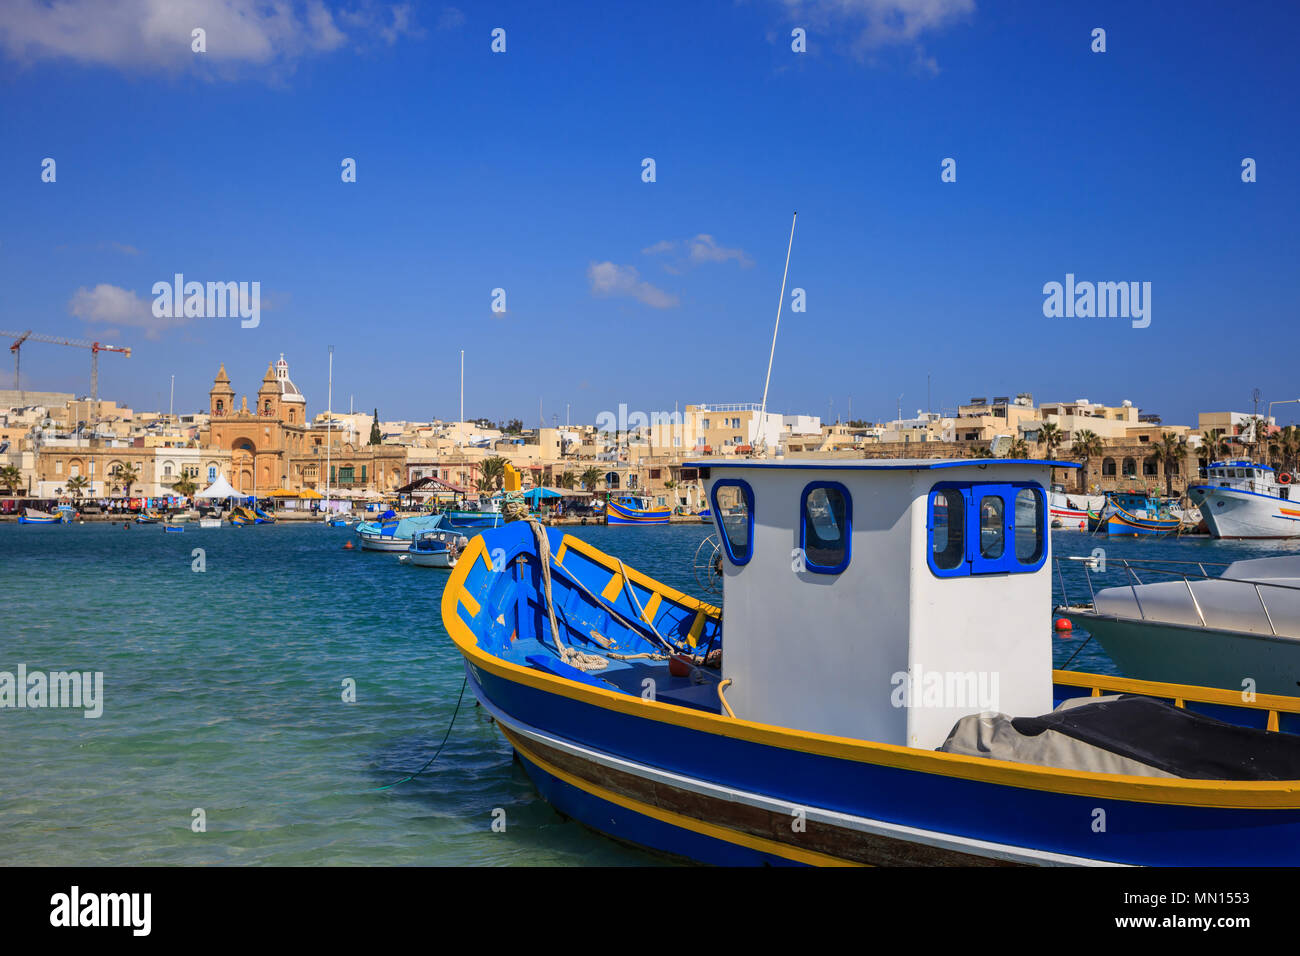 Traditional colorful fishing boats, luzzu, anchored at Marsaxlokk, the historic port of Malta. Blue sky and village background. Close up view. Stock Photo